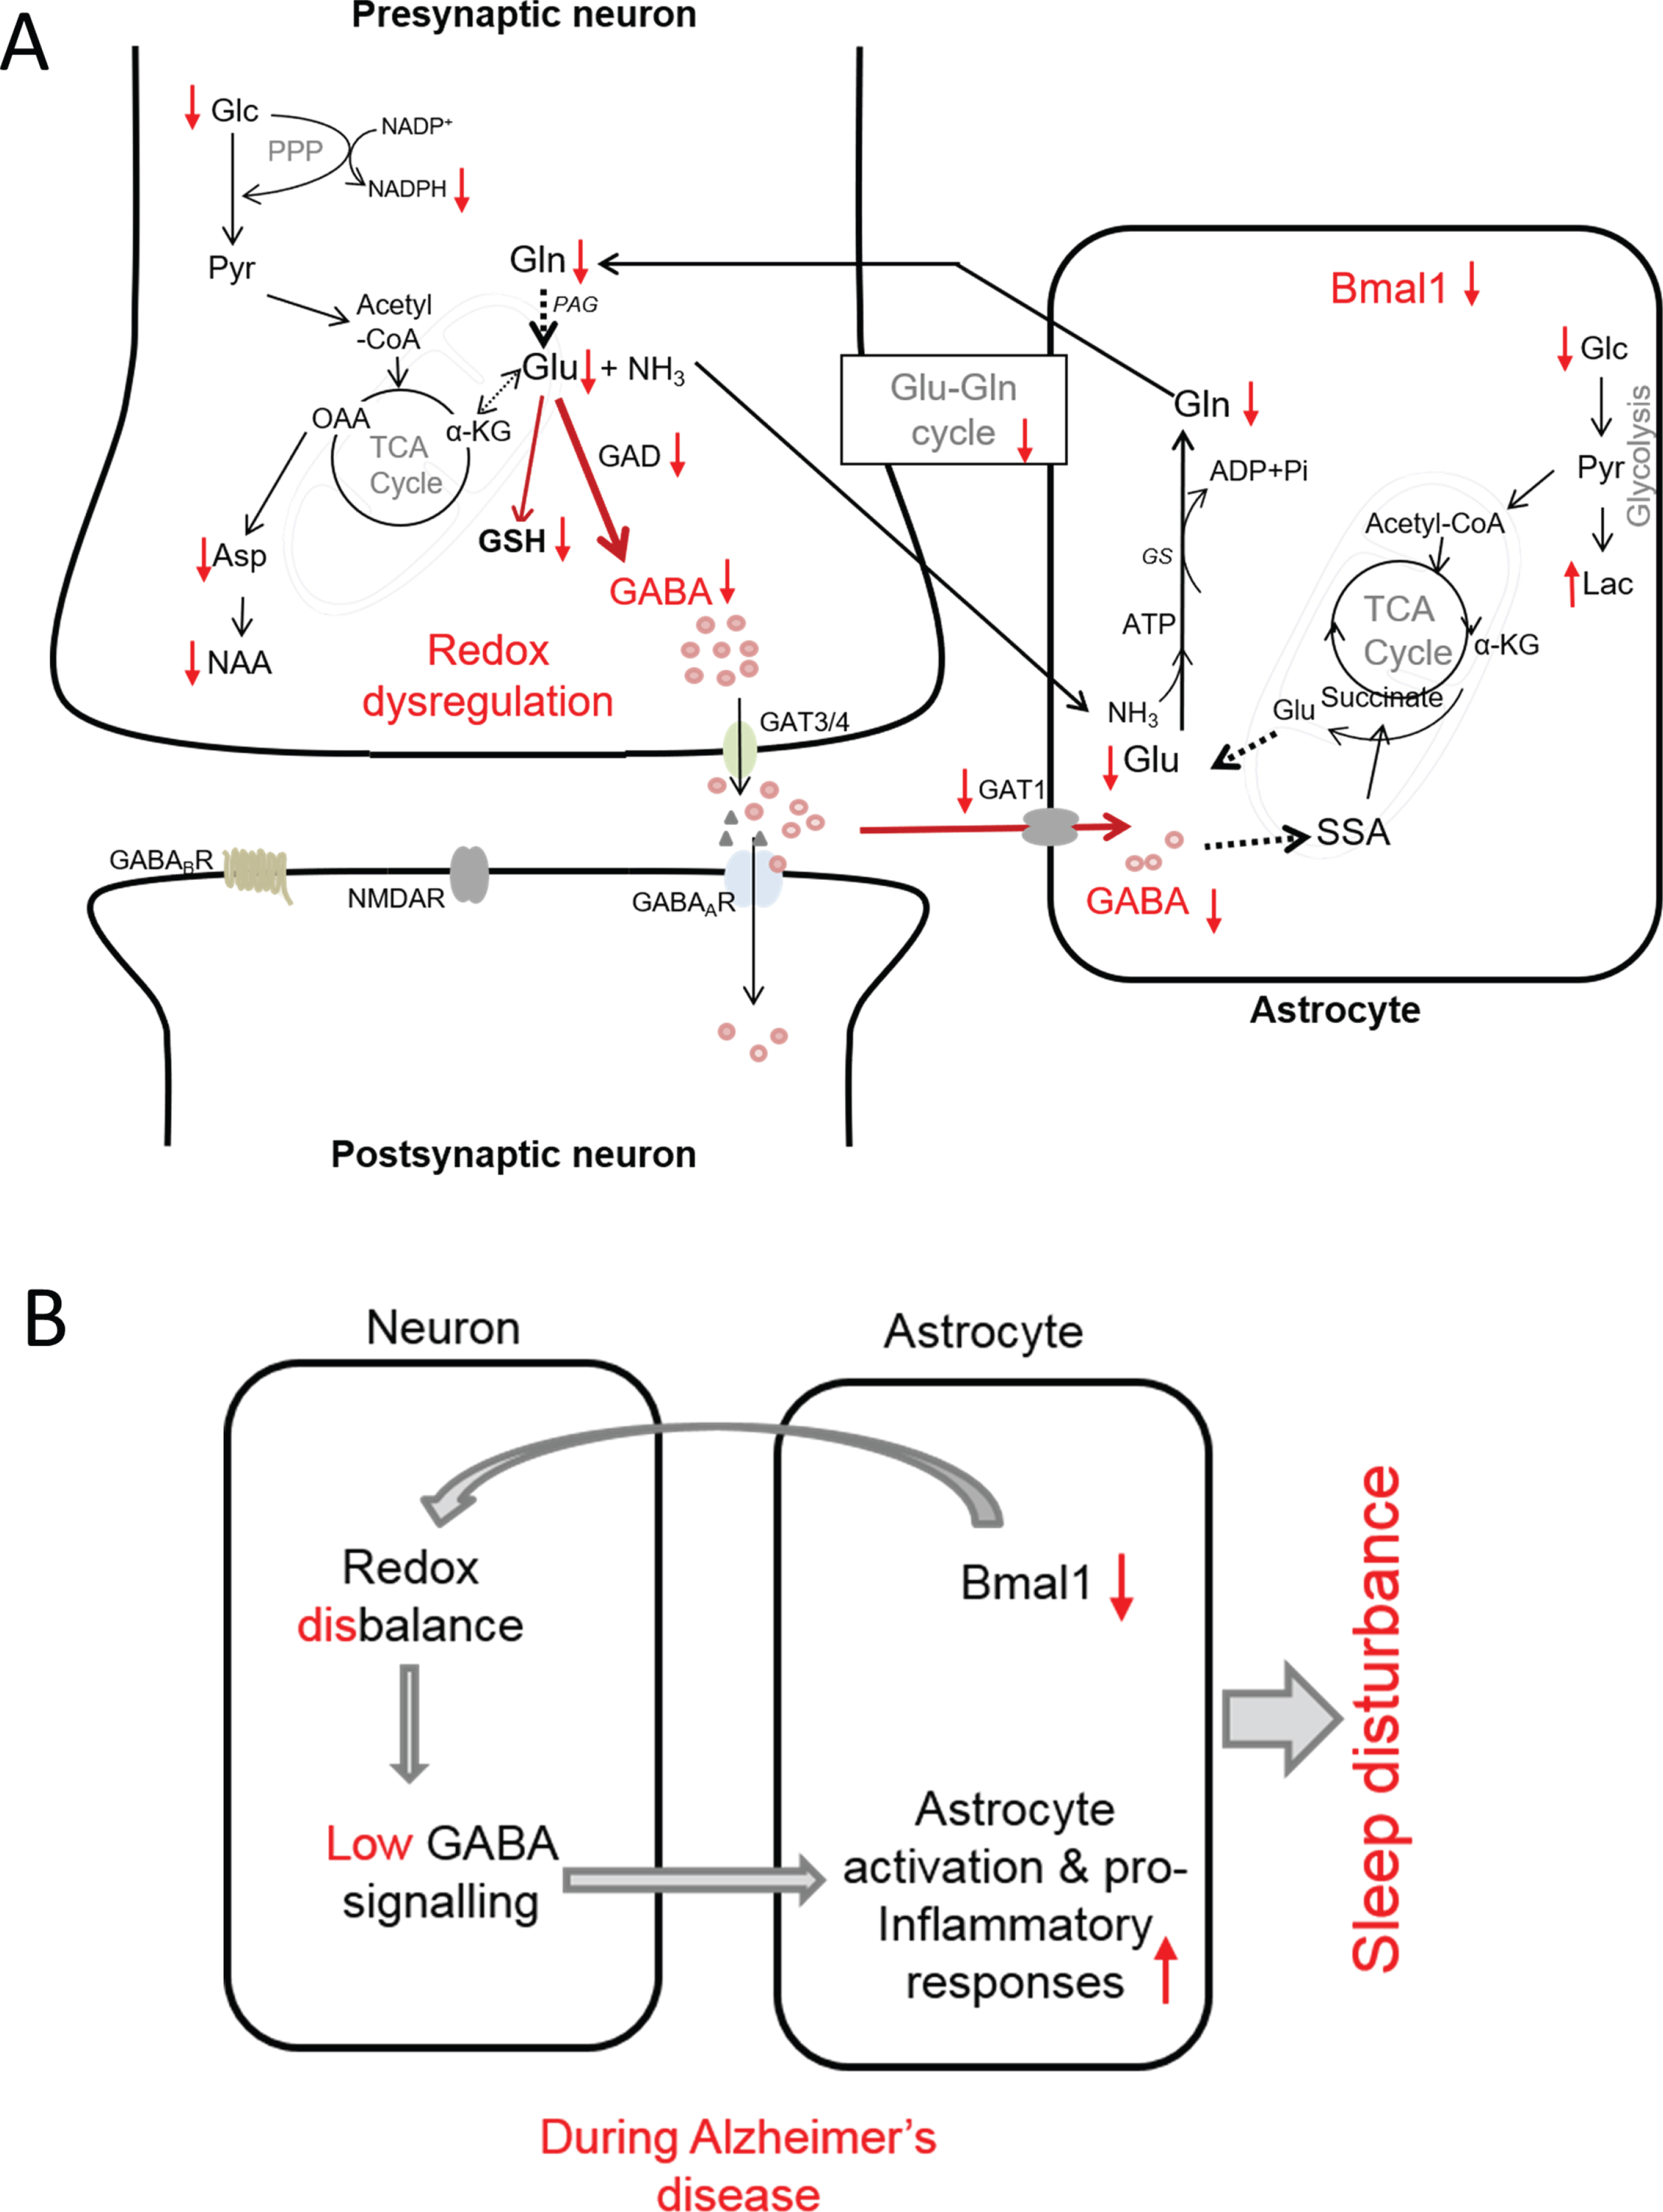 Proposed model of interconnection between redox dysregulation, compromised GABA signaling, neuroinflammation and SCN dysfunction in AD as evidenced by observed changes in metabolic profile and immunohistology in the present study. A) Observed increases and decreases in metabolites in SCN of AD mice is shown by arrows (i.e., ↑ and ↓, respectively). B) Summarized view of the interconnection between reduced Bmal1, redox disbalance, dysregulation of GABA signaling and inflammation that may be at the root of circadian rhythm disruption leading to sleep disturbance in AD. αKG, α-ketoglutarate; Asp, aspartate; GABAA GABAB, GABA receptors; GAT1 and GAT3/4, specific GABA transporter; GAD, glutamic acid decarboxylase; Glc, glucose; Gln, glutamine; Glu, glutamate; GS, glutamine synthetase; GSH, glutathione; Lac, lactate; NAA, N-acetyl aspartate; NMDAR, N-methyl-D-aspartate receptor (Glu receptor): OA, oxaloacetic acid; PPP, pentose phosphate pathway; SSA, succinate semialdehyde; TCA cycle, tricarboxylic acid cycle.